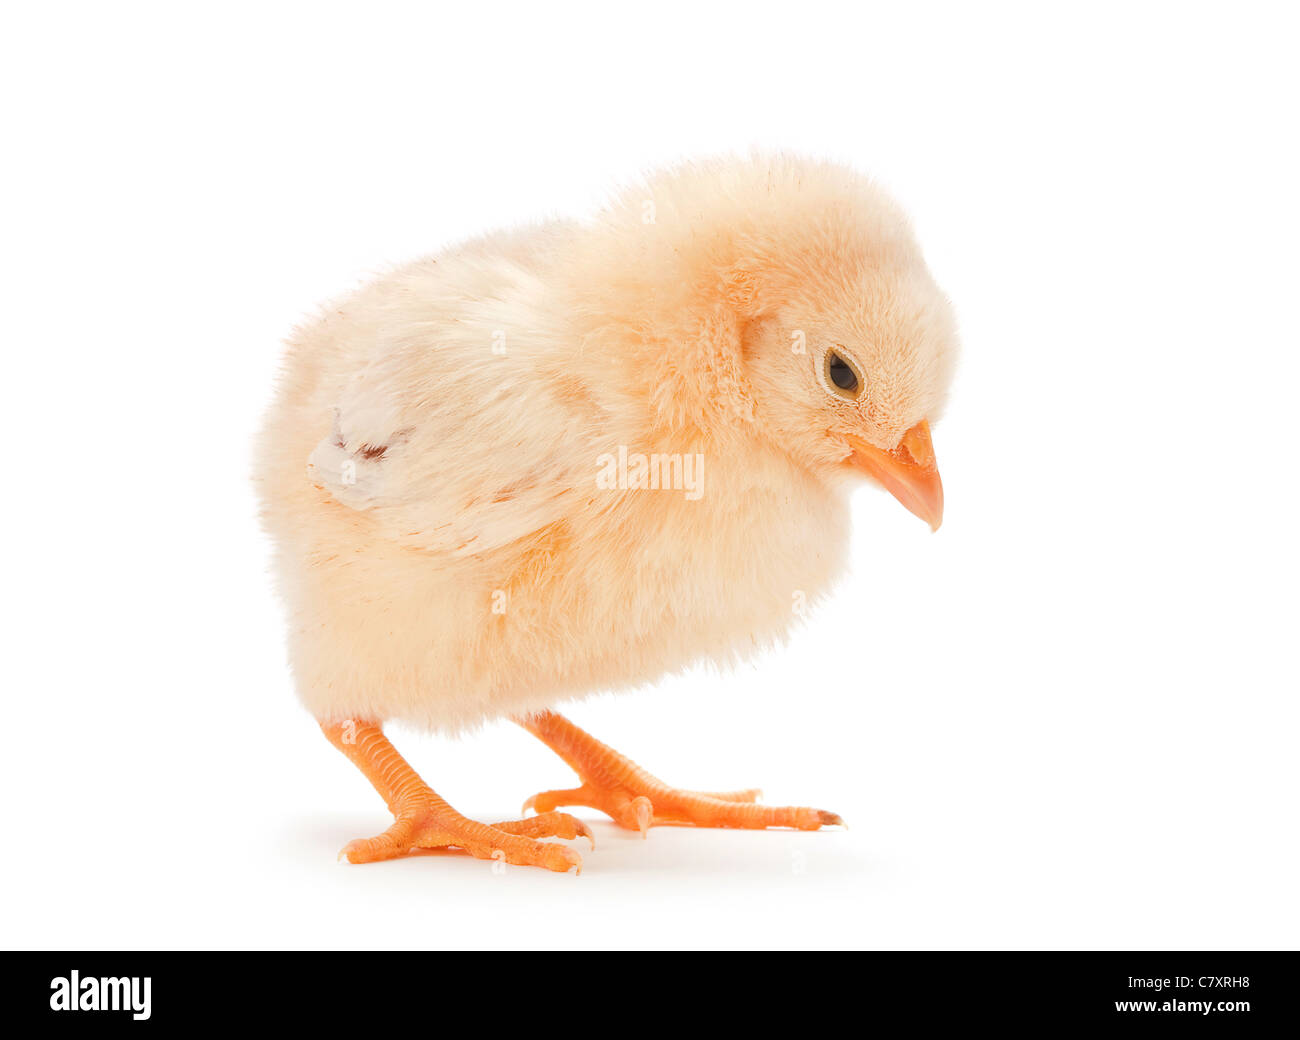 Jaune petit poulet isolated on white Banque D'Images